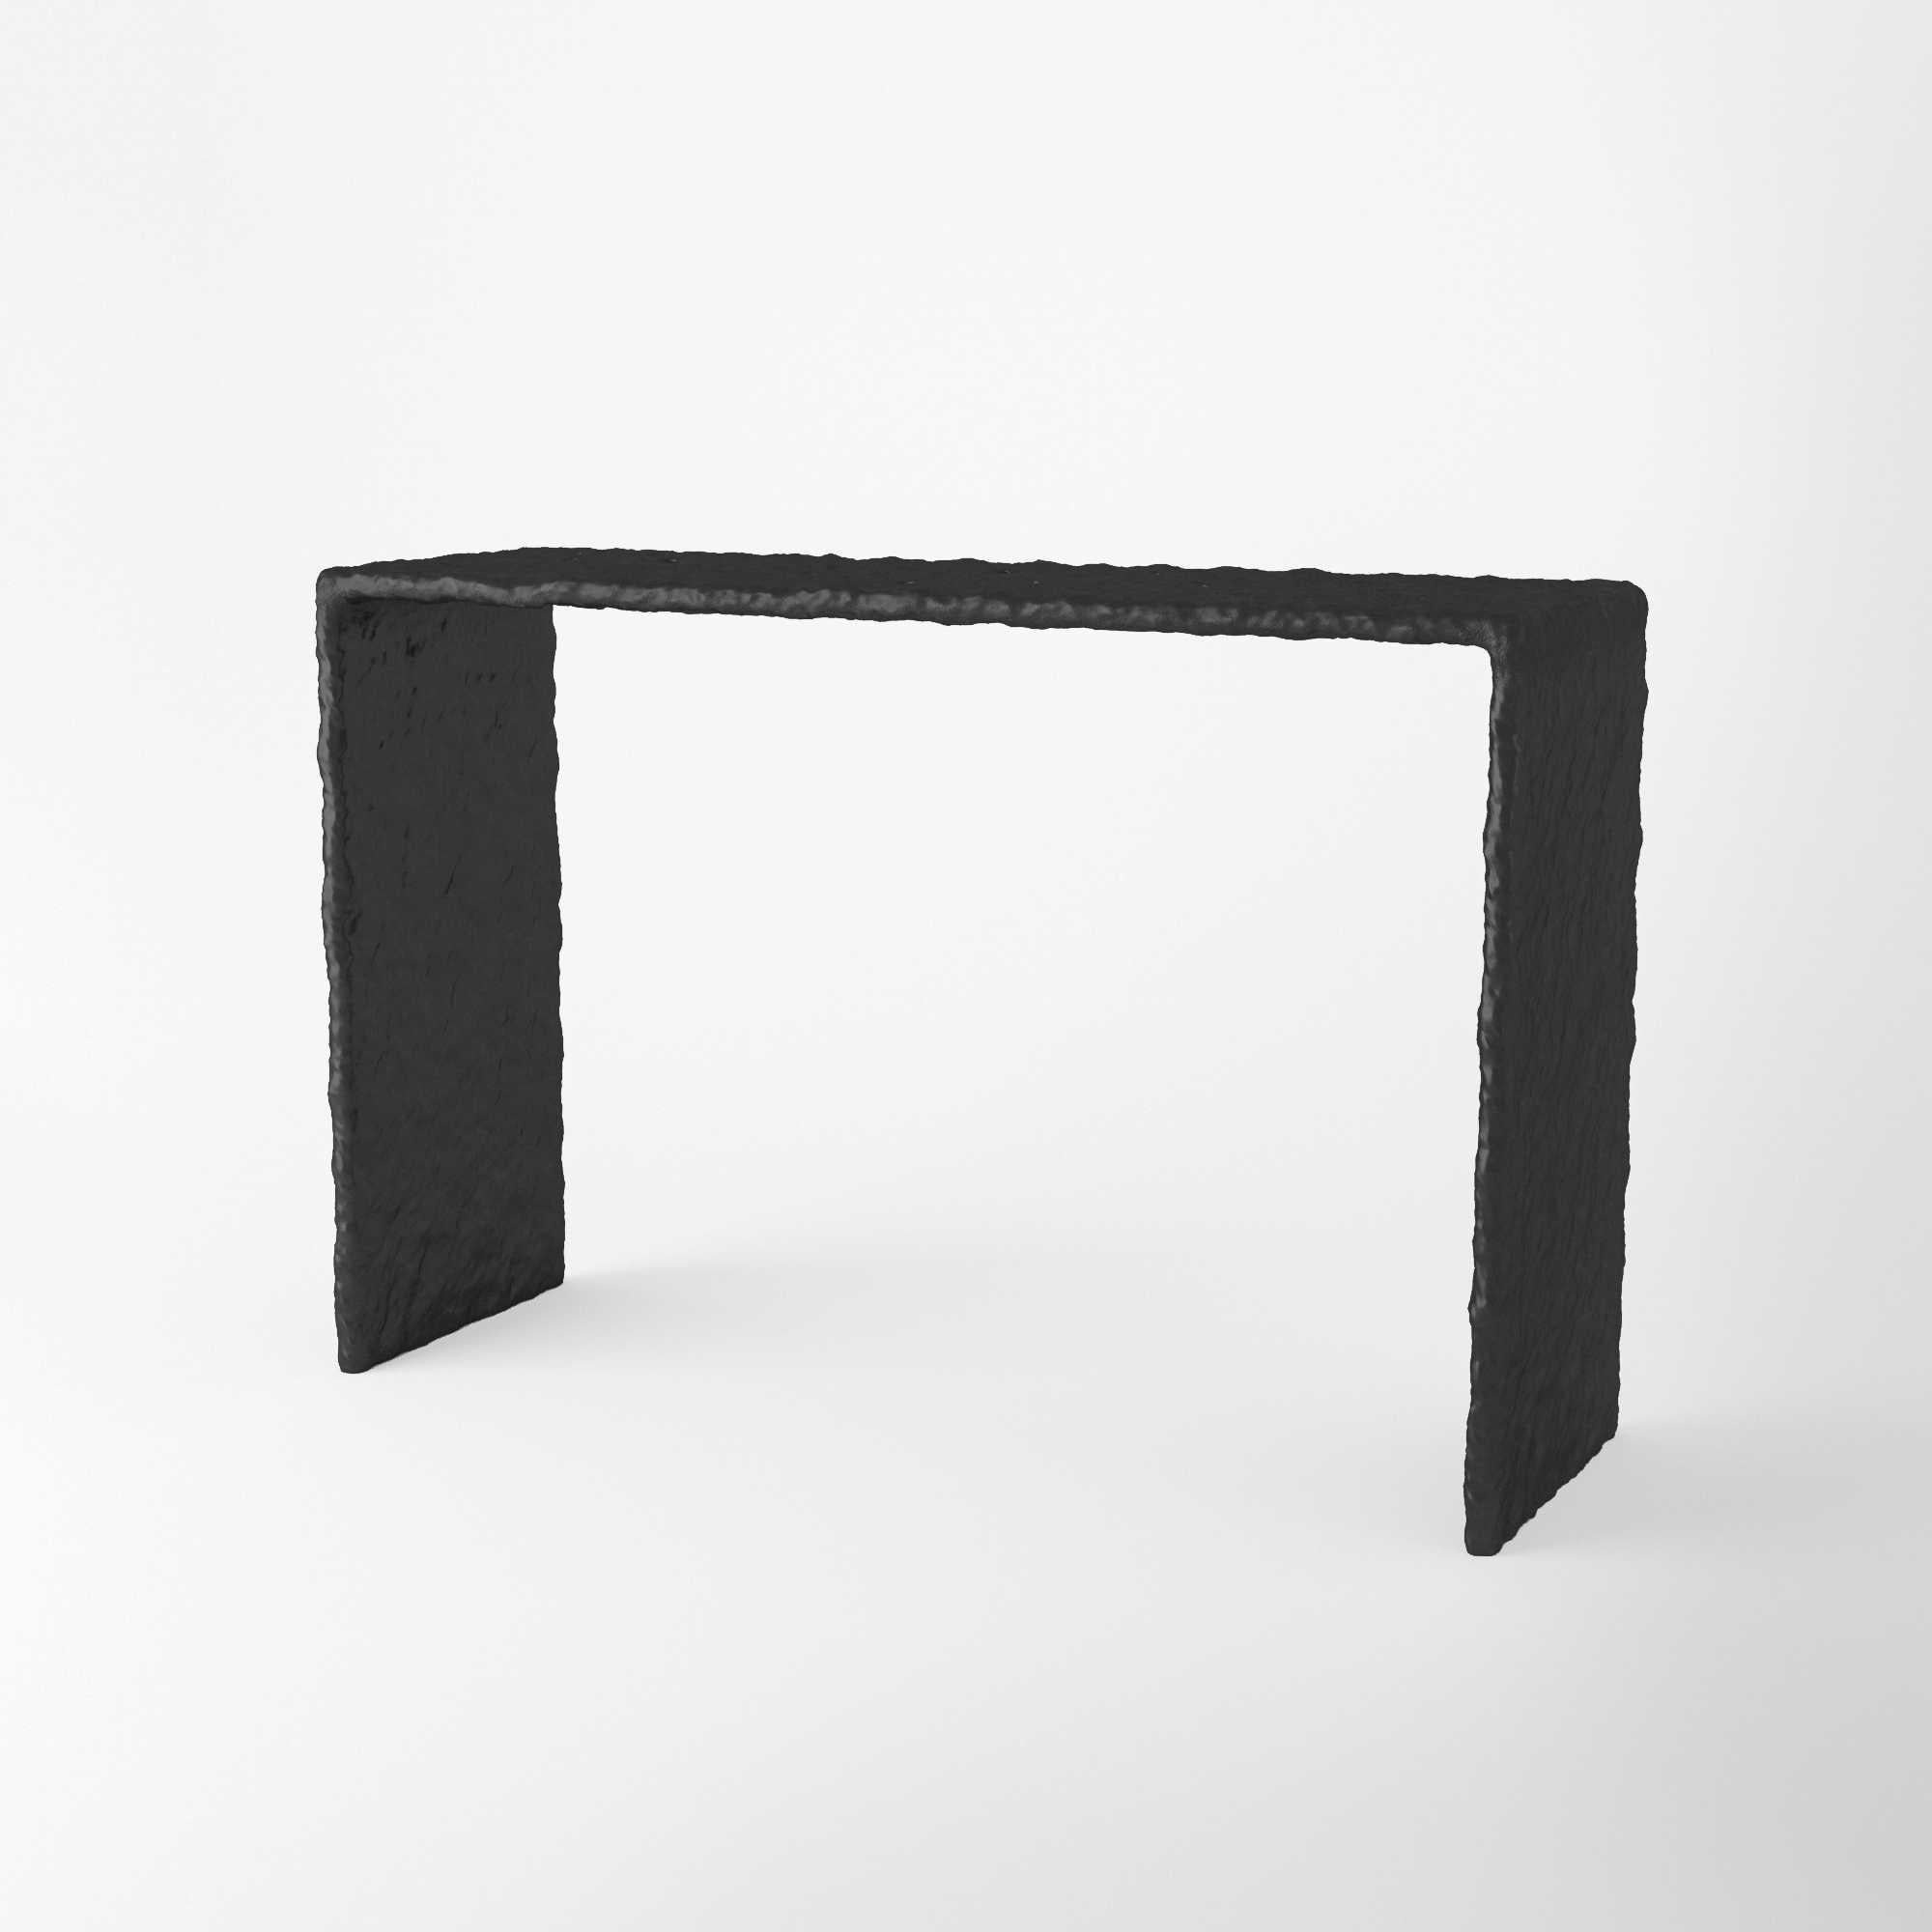 Steel Sculpted Contemporary Console Table by Victoria Yakusha